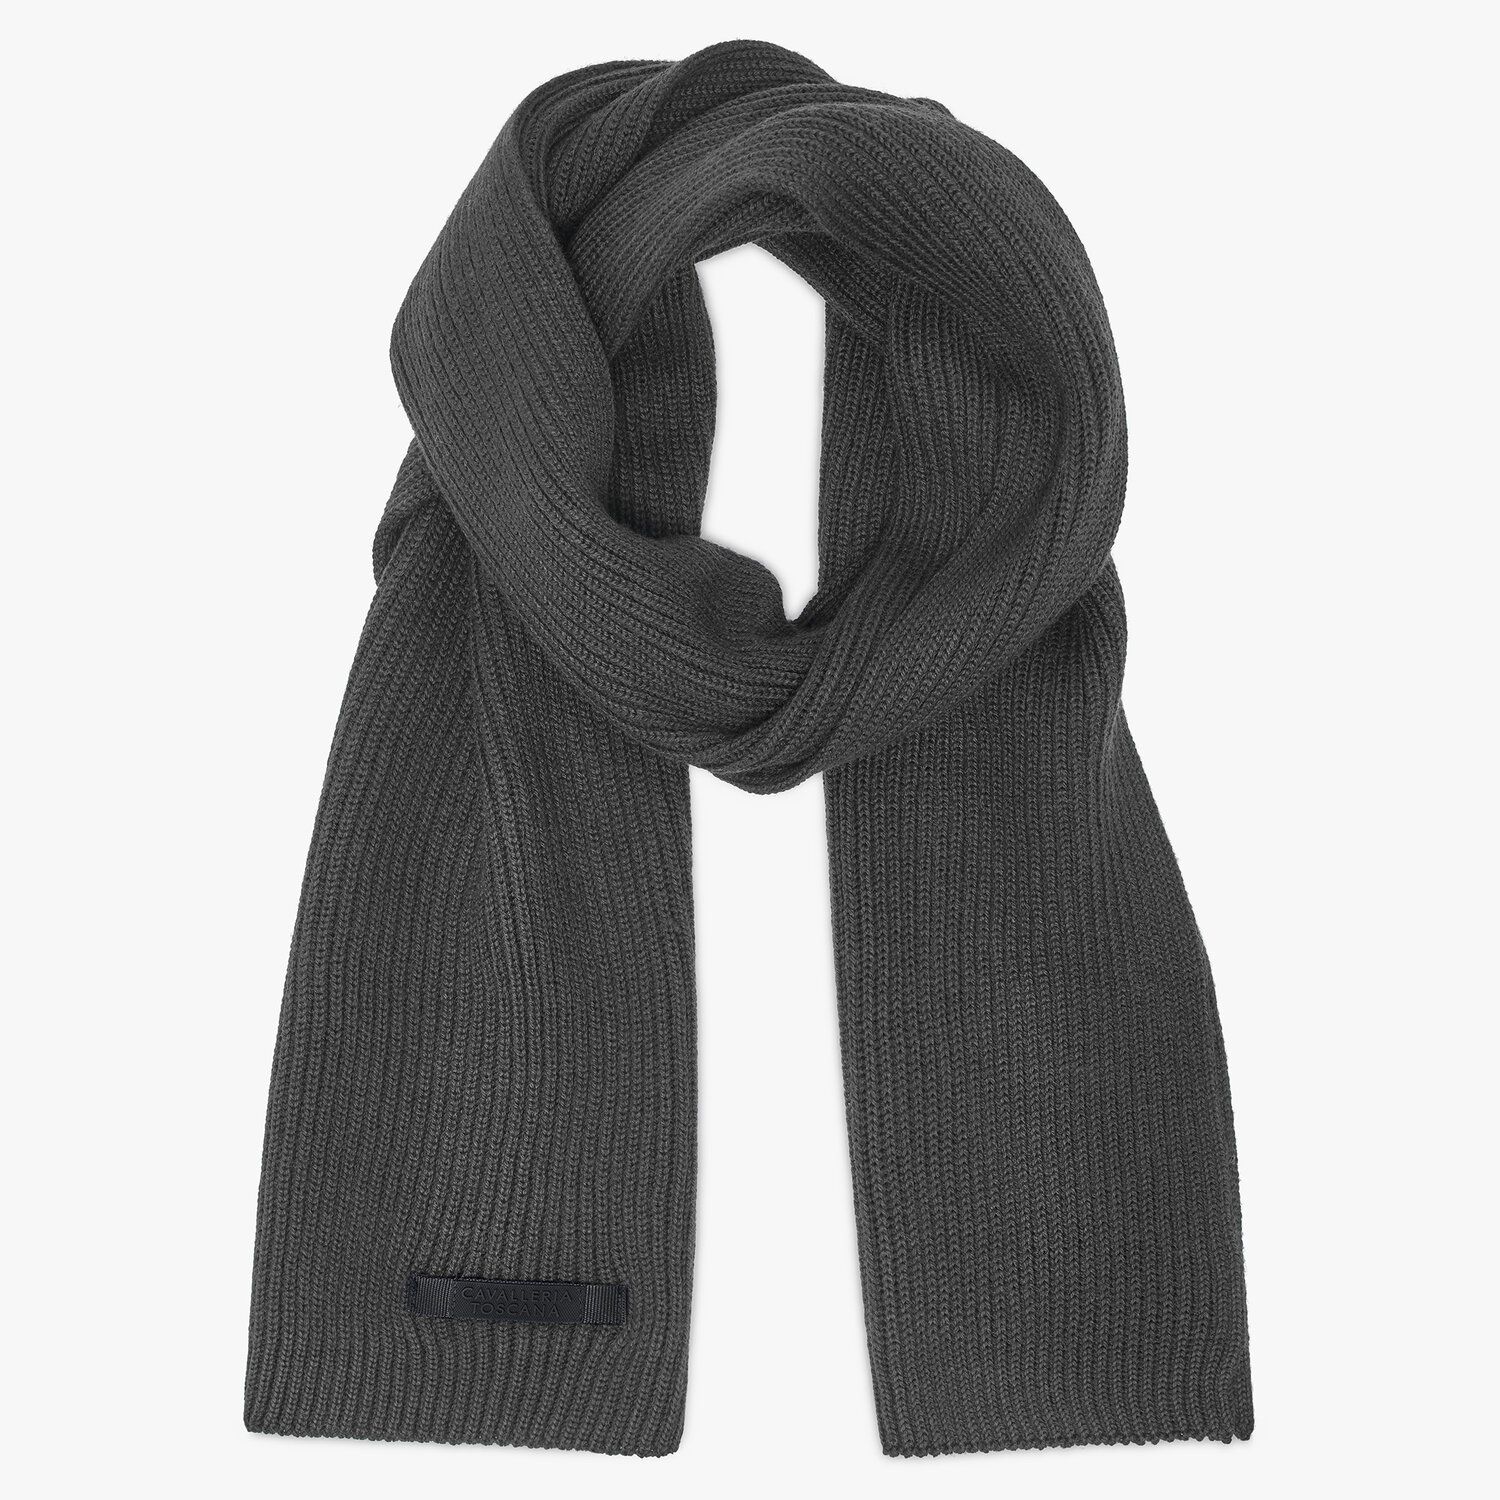 Merini Cool by CT - The scarf for all occasions!